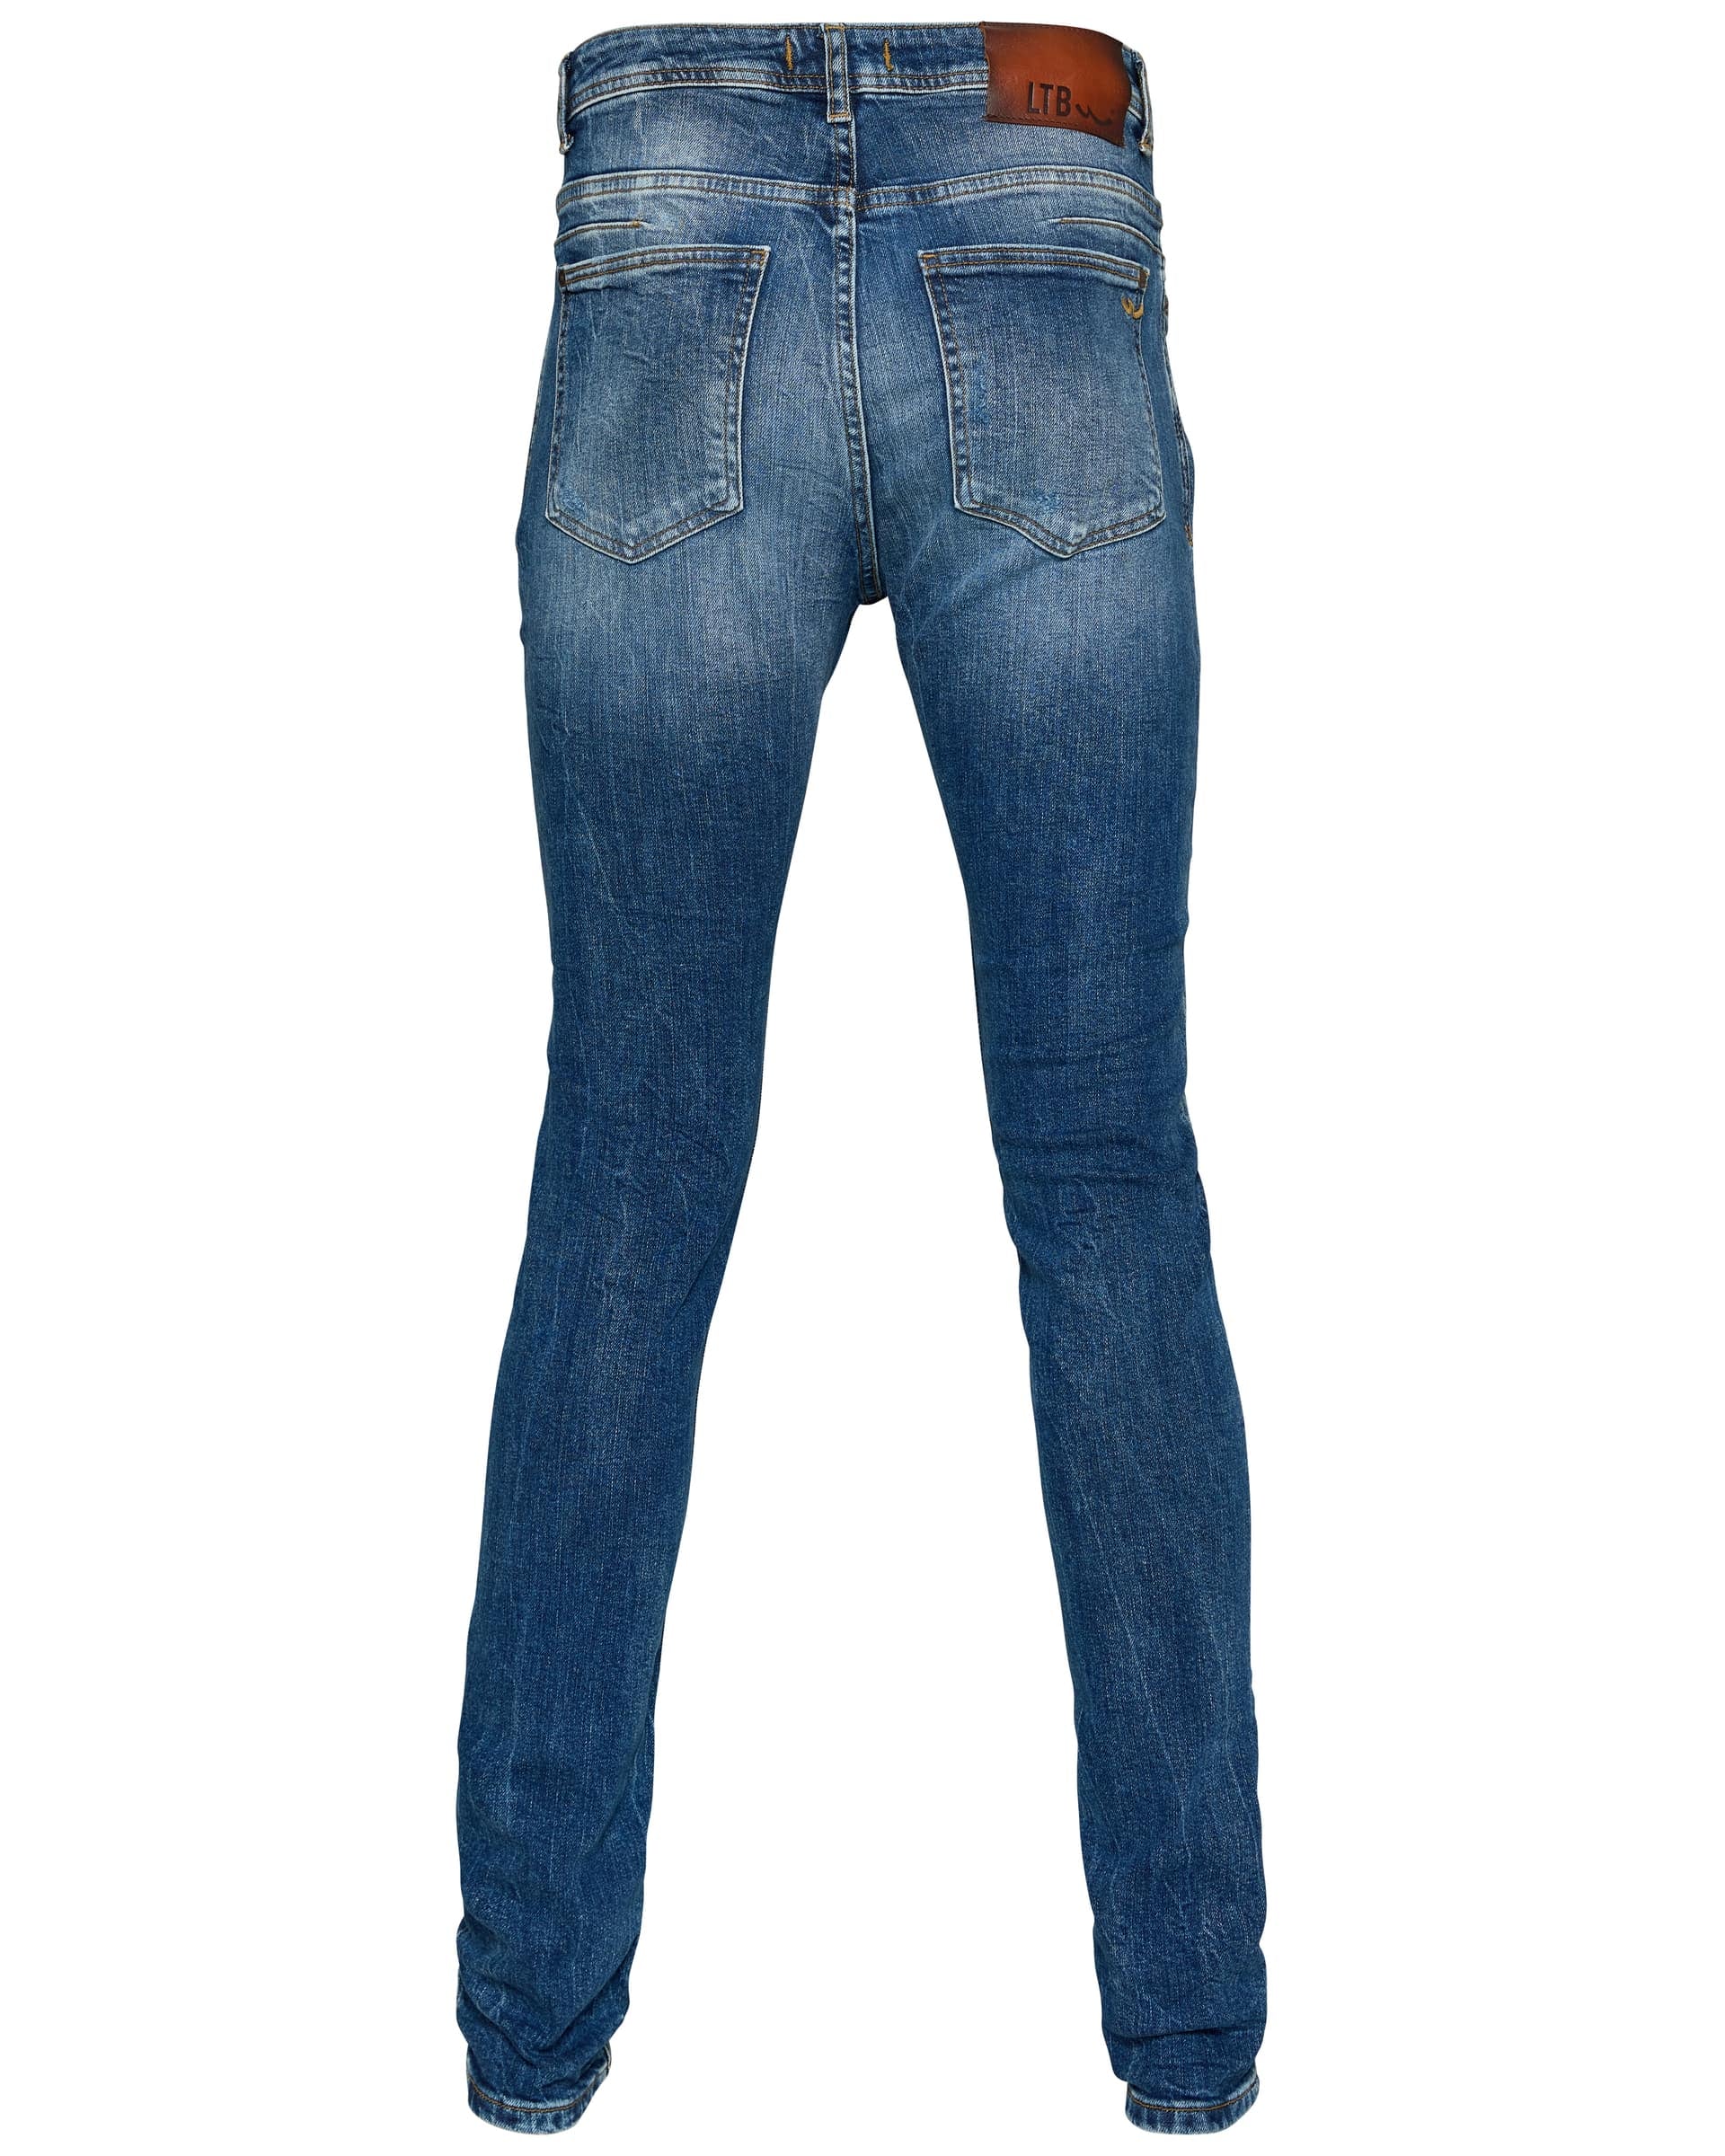 Henry x Andreas Jean - Men's Jeans at Menzclub